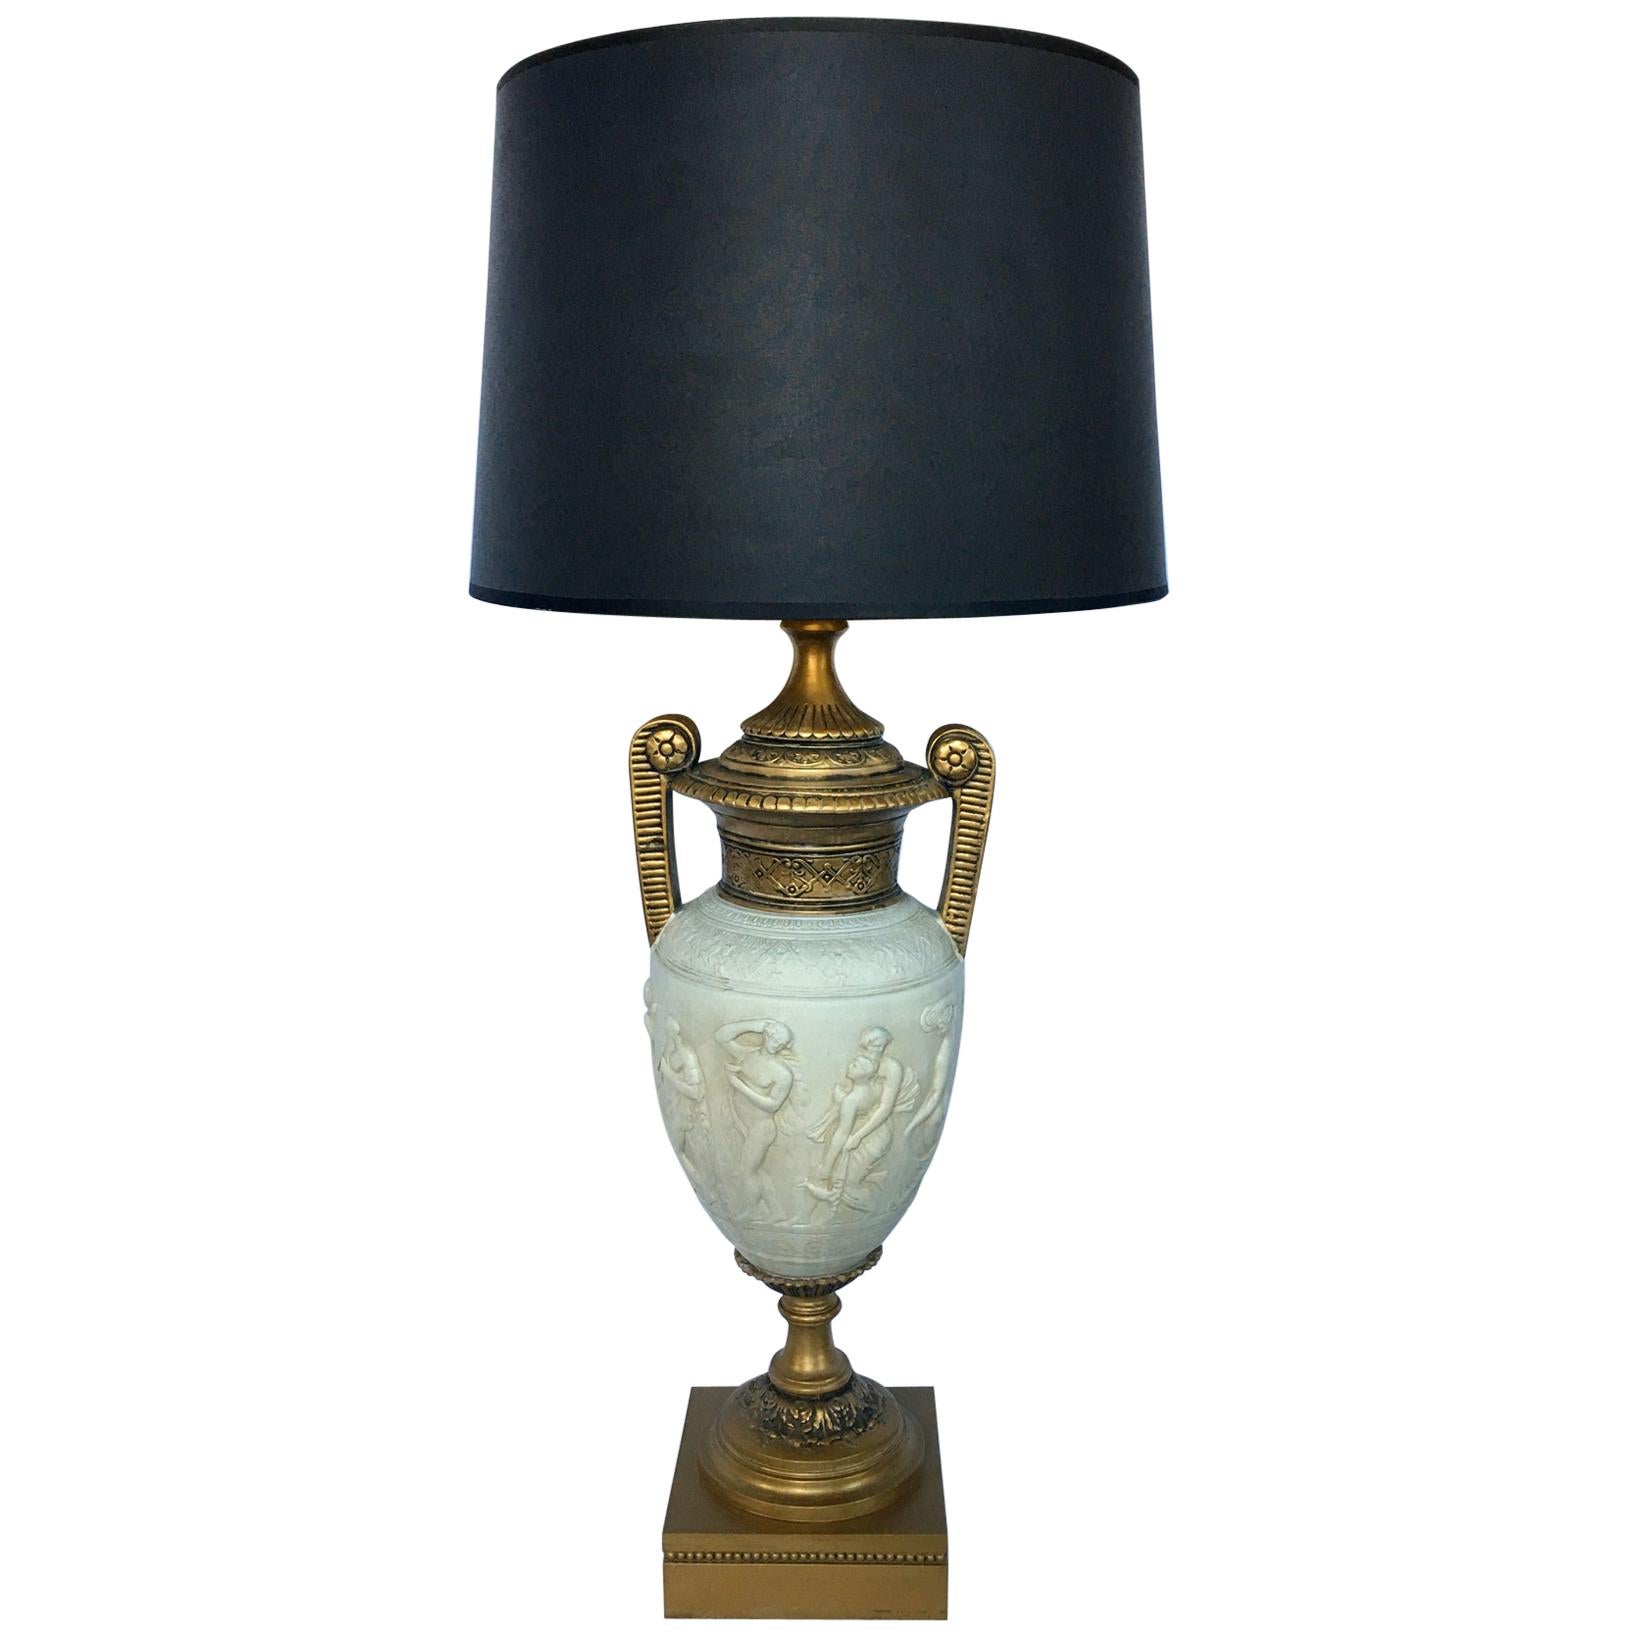 Tall Neoclassical Style Figure Handled Urn Table Lamp